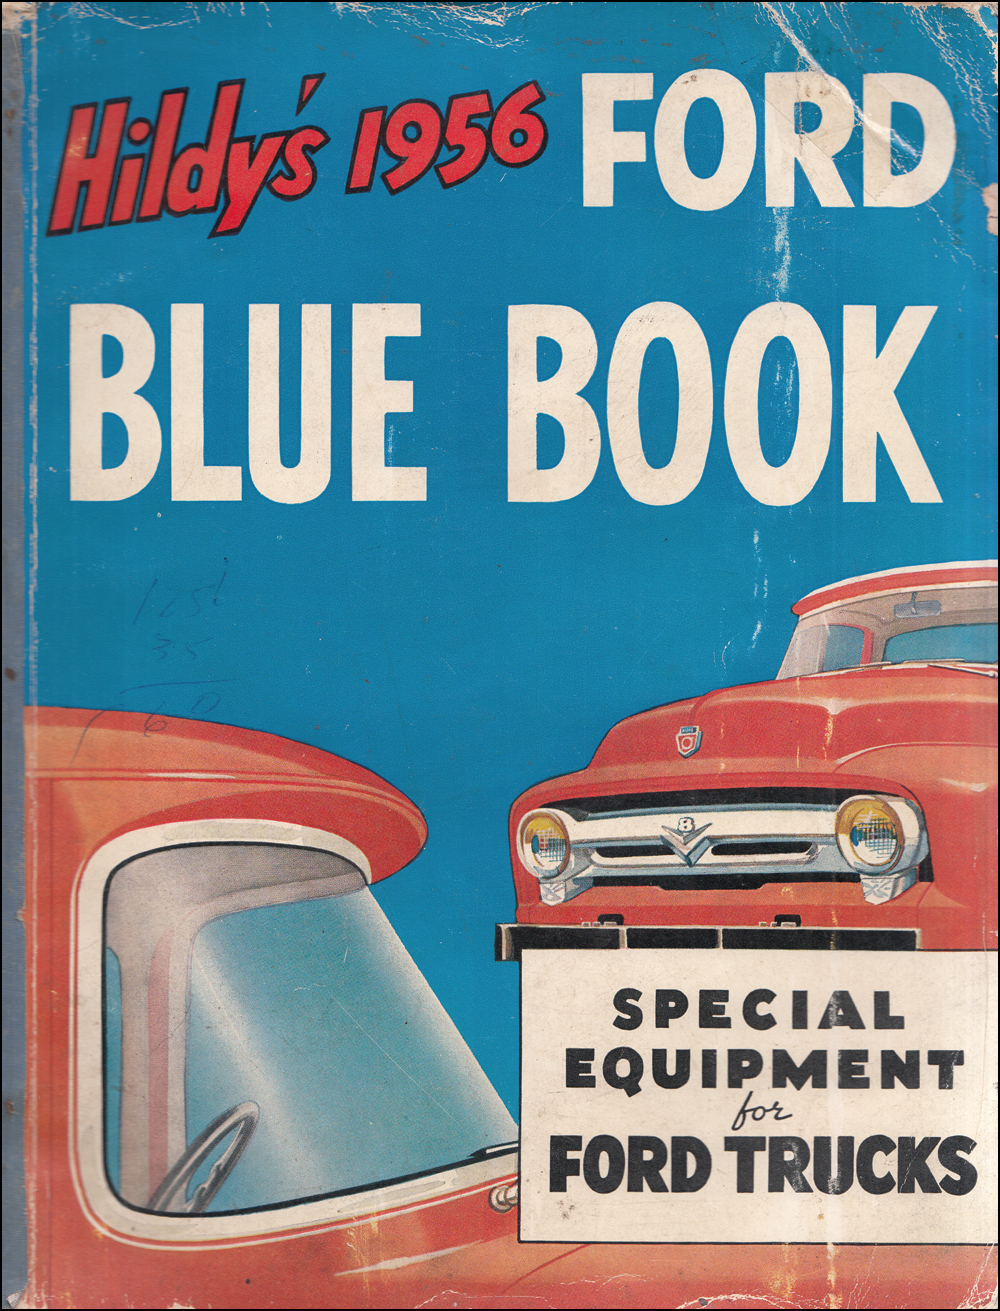 1956 Ford Truck Hildy's Blue Book Special Equipment Catalog